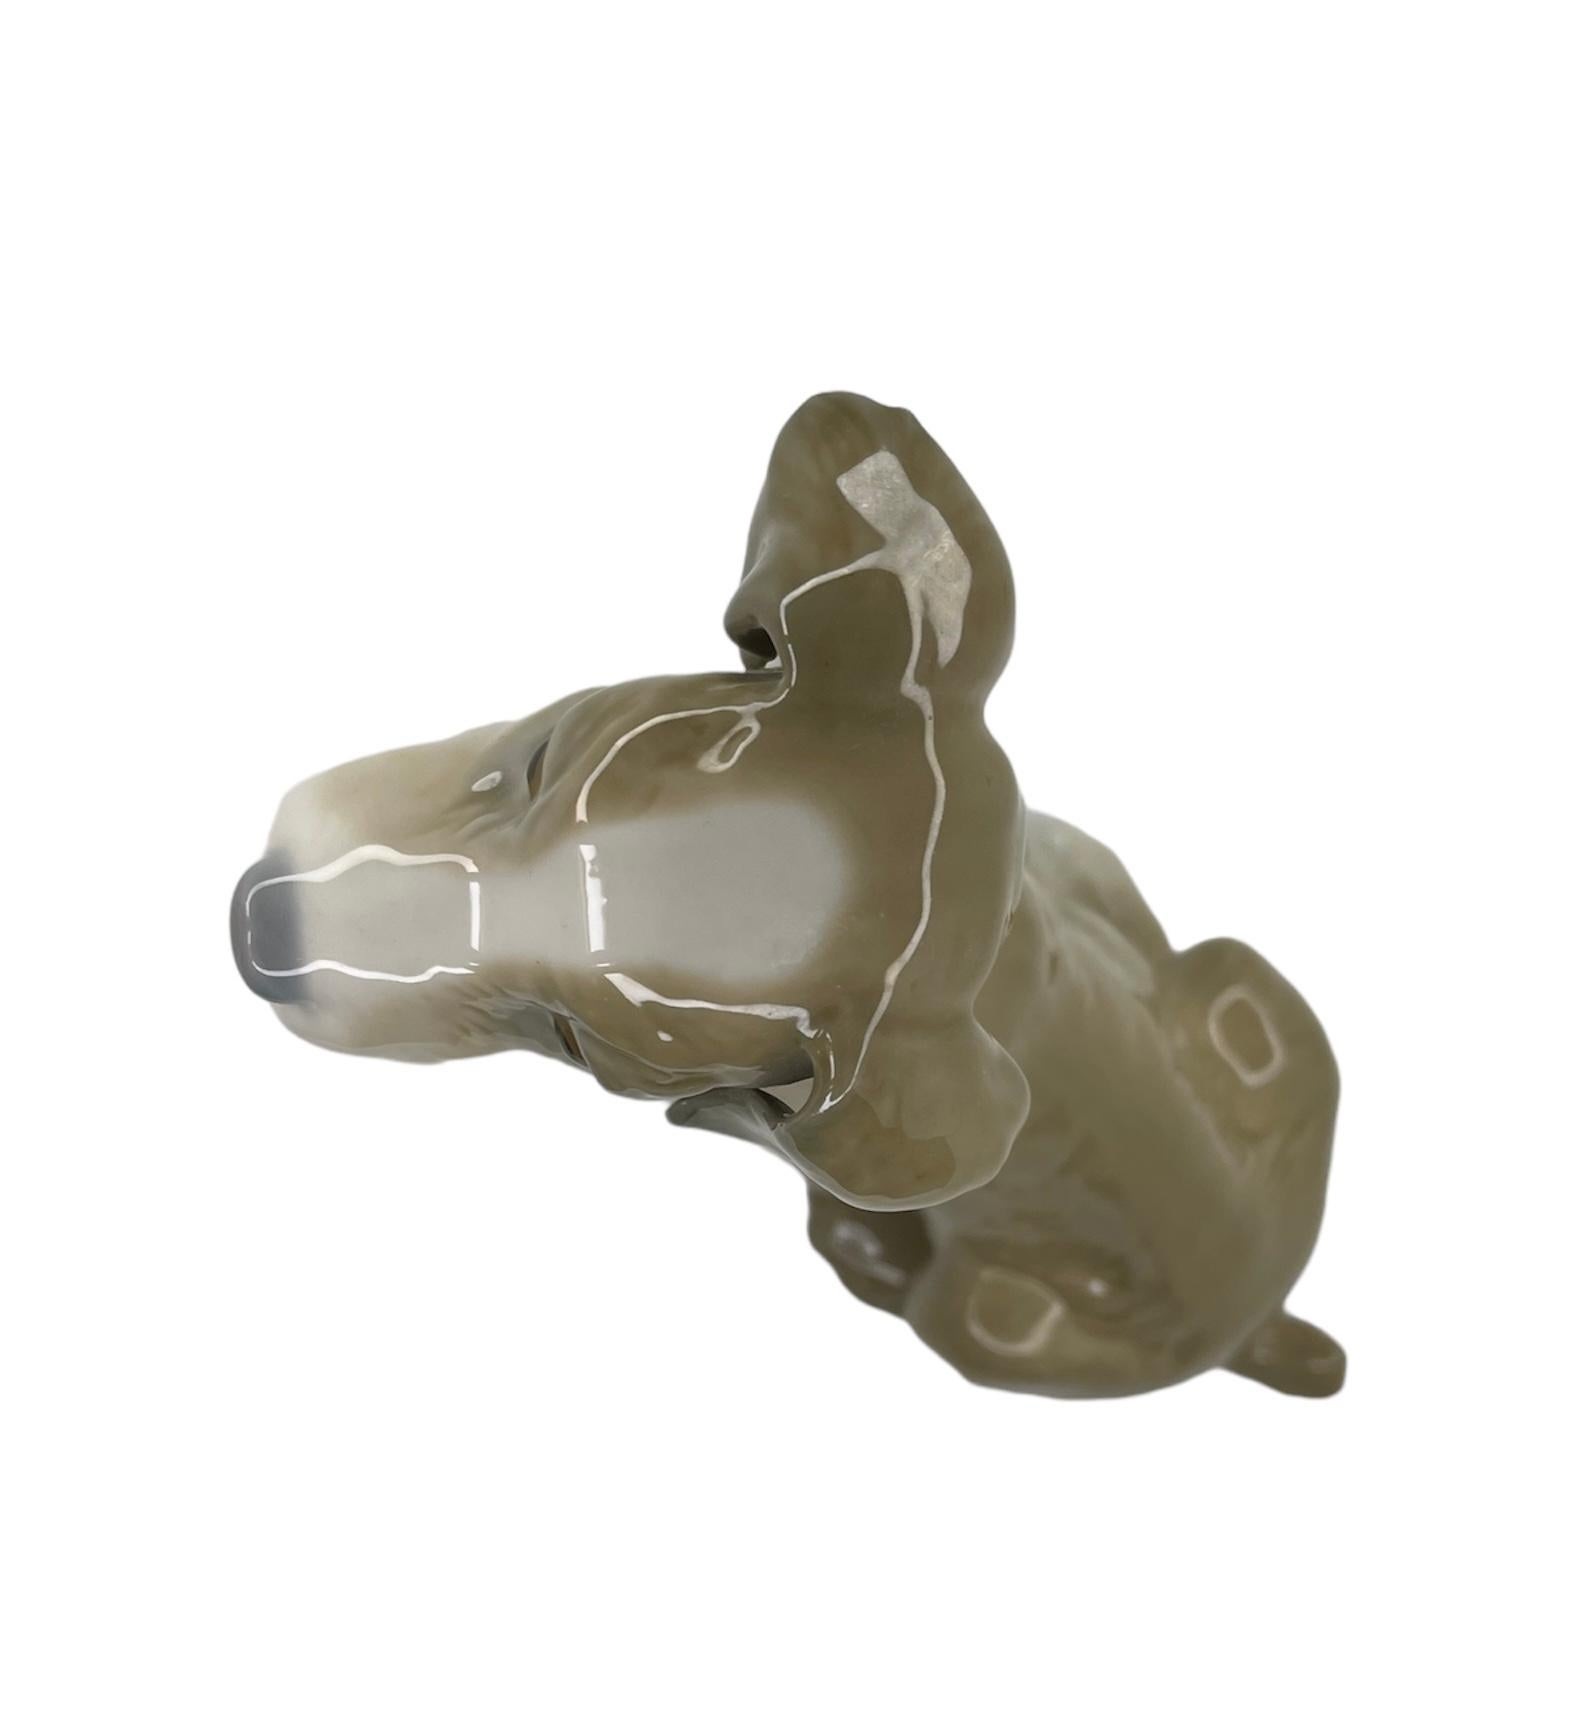 Lladro Porcelain Figurine Of A Setter Dog In Good Condition For Sale In Guaynabo, PR